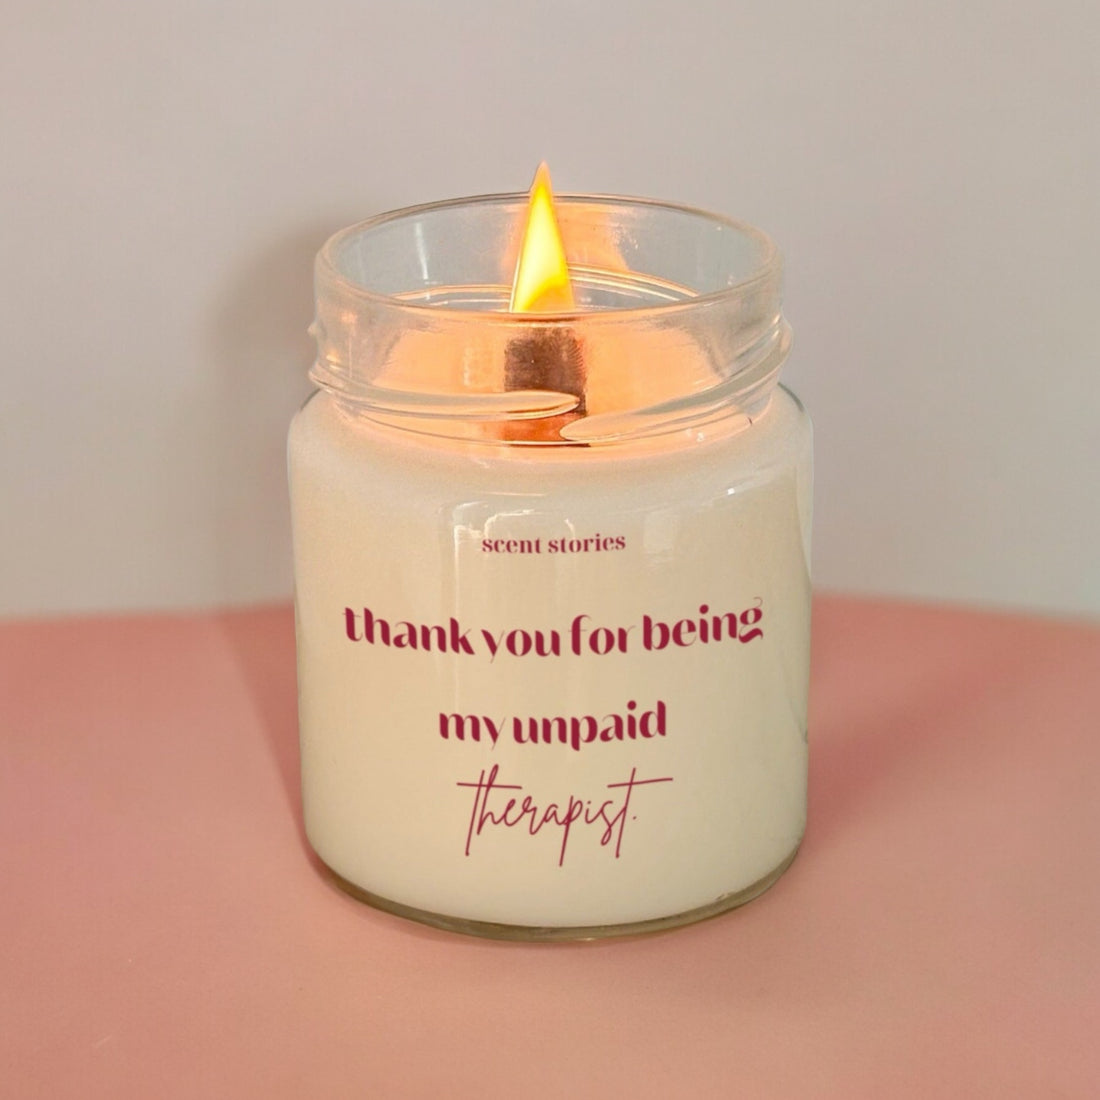 Candle Gift- Thank you for being my unpaid therapist